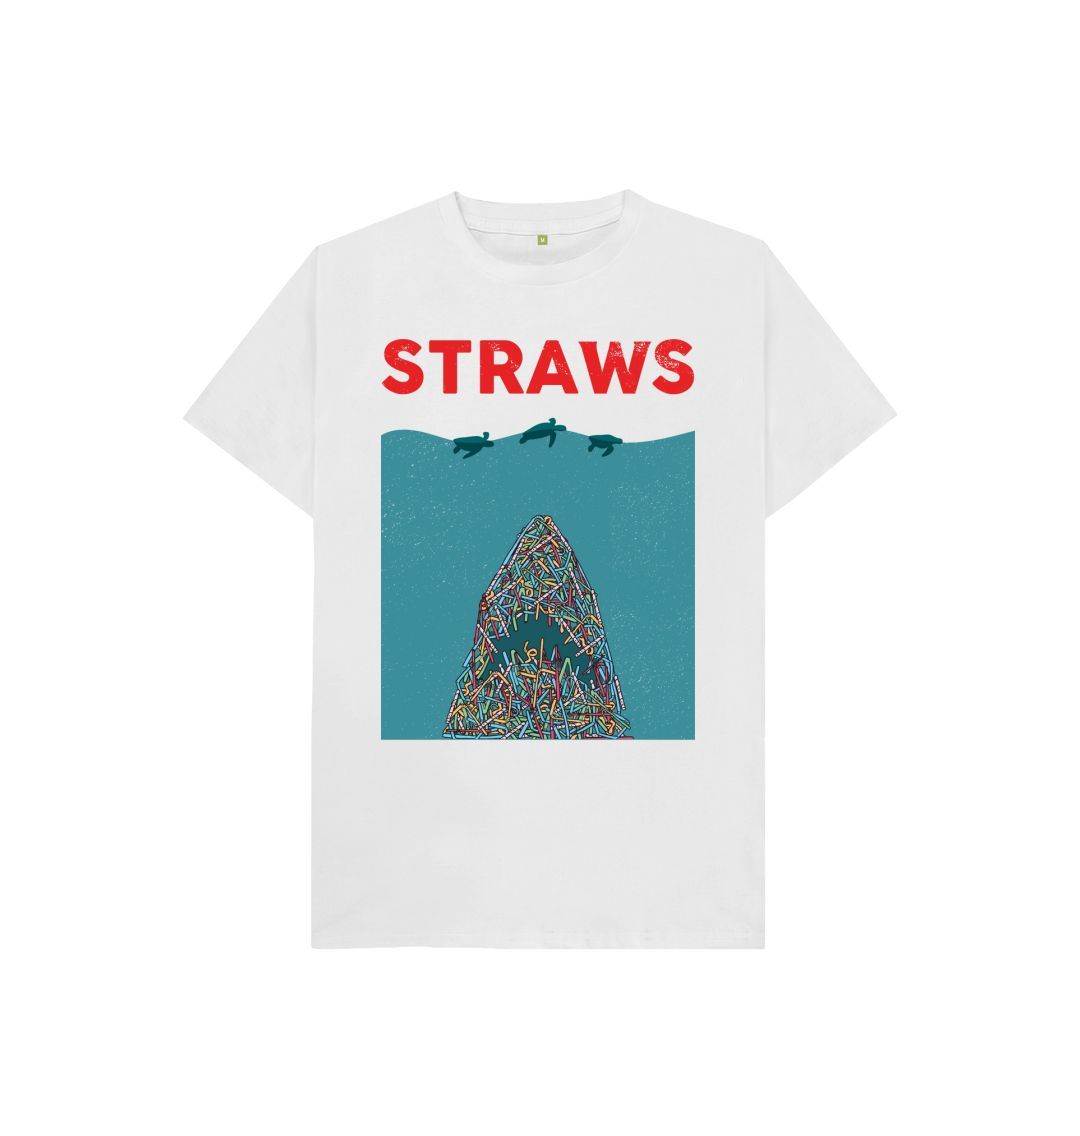 White Sustainable T-Shirt - Save Our Seas from Straws